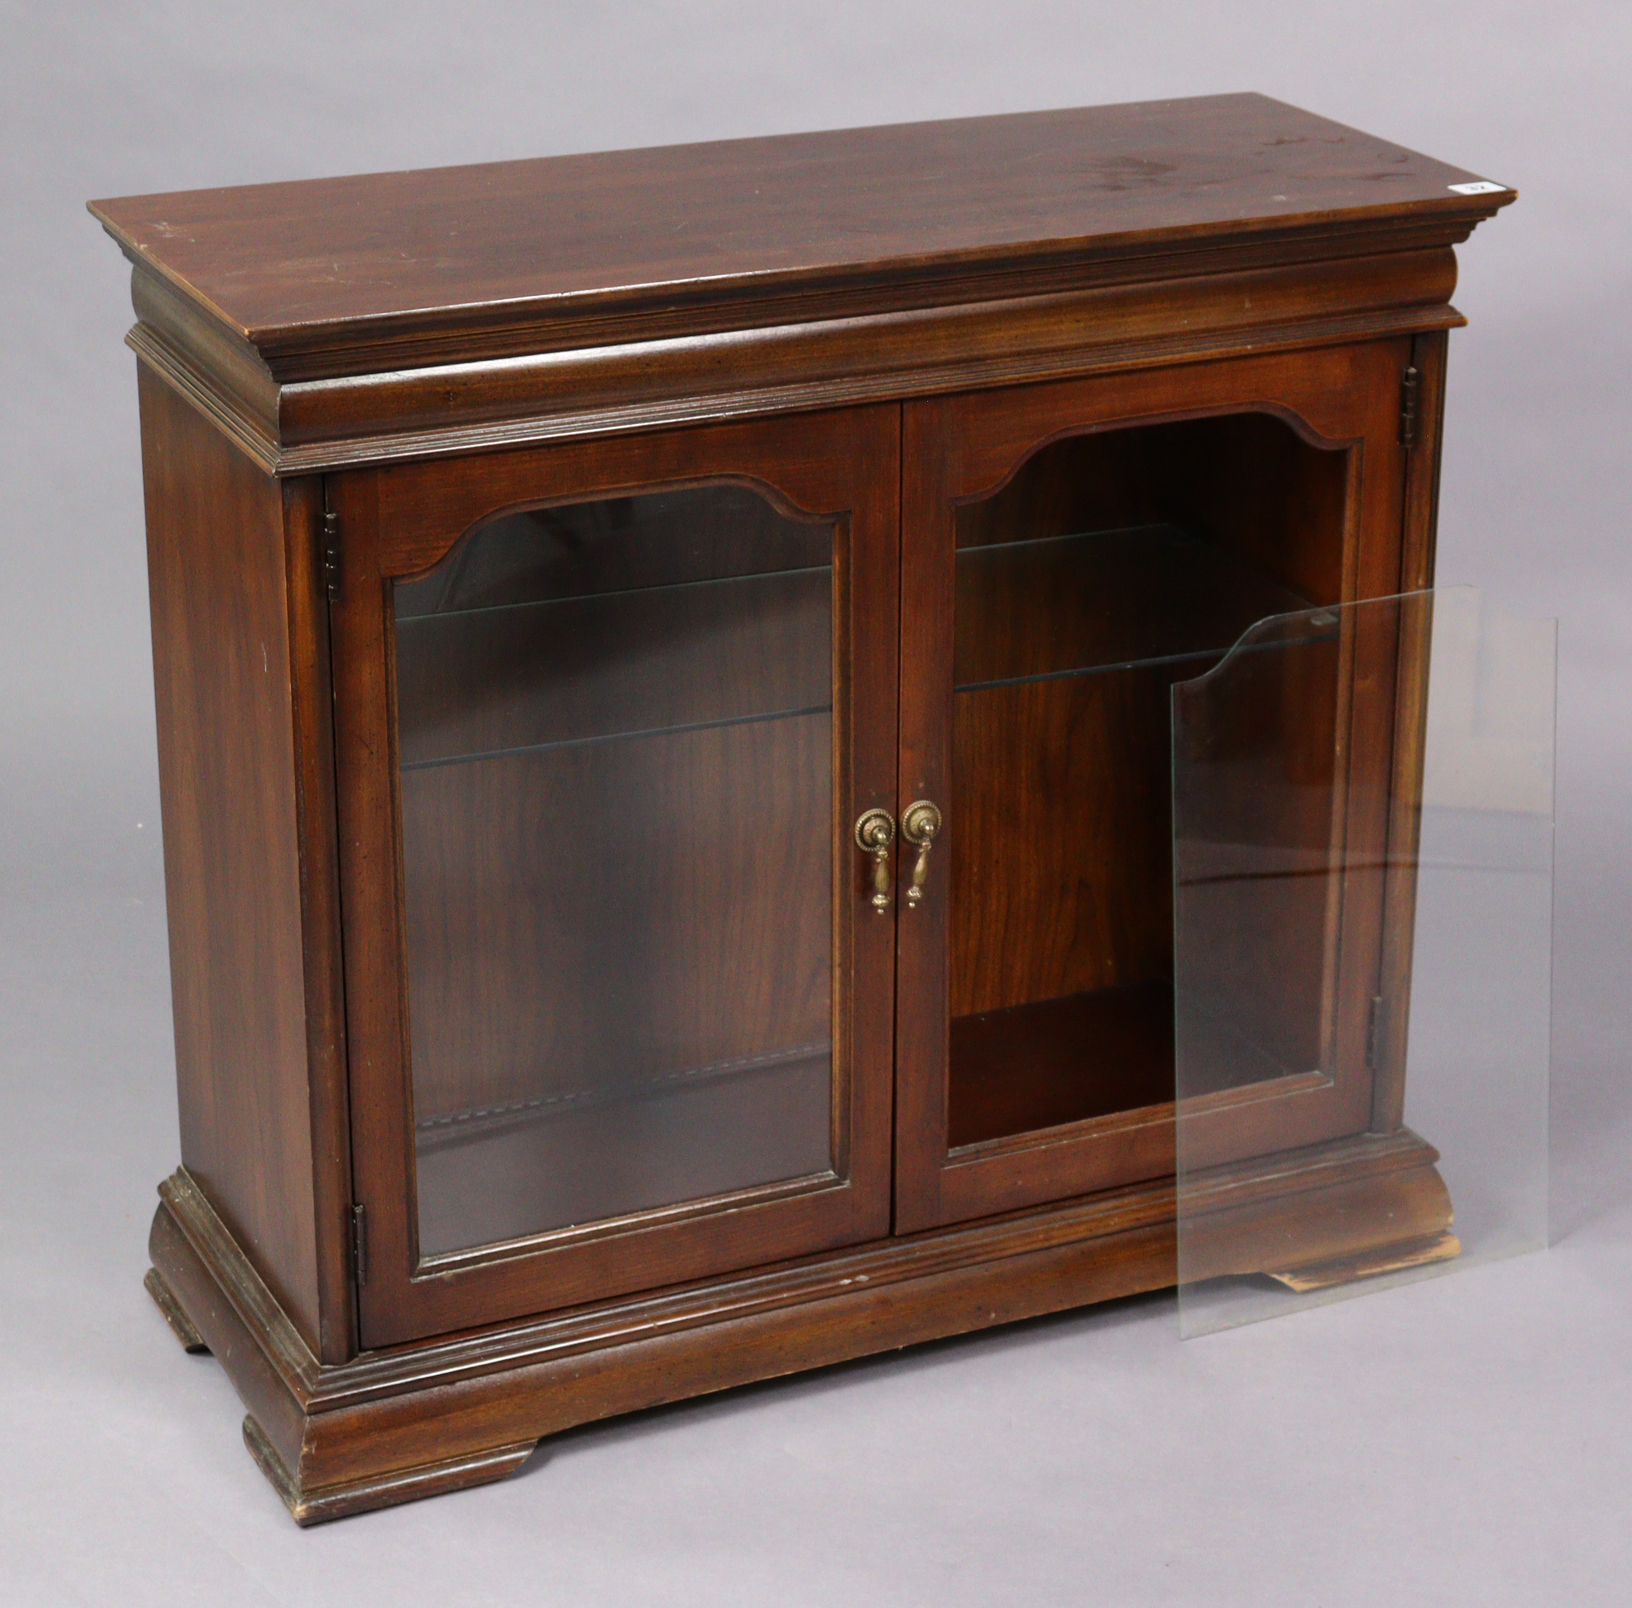 A mahogany dwarf cabinet fitted with a plate-glass shelf, & on a shaped plinth base, 33” wide x